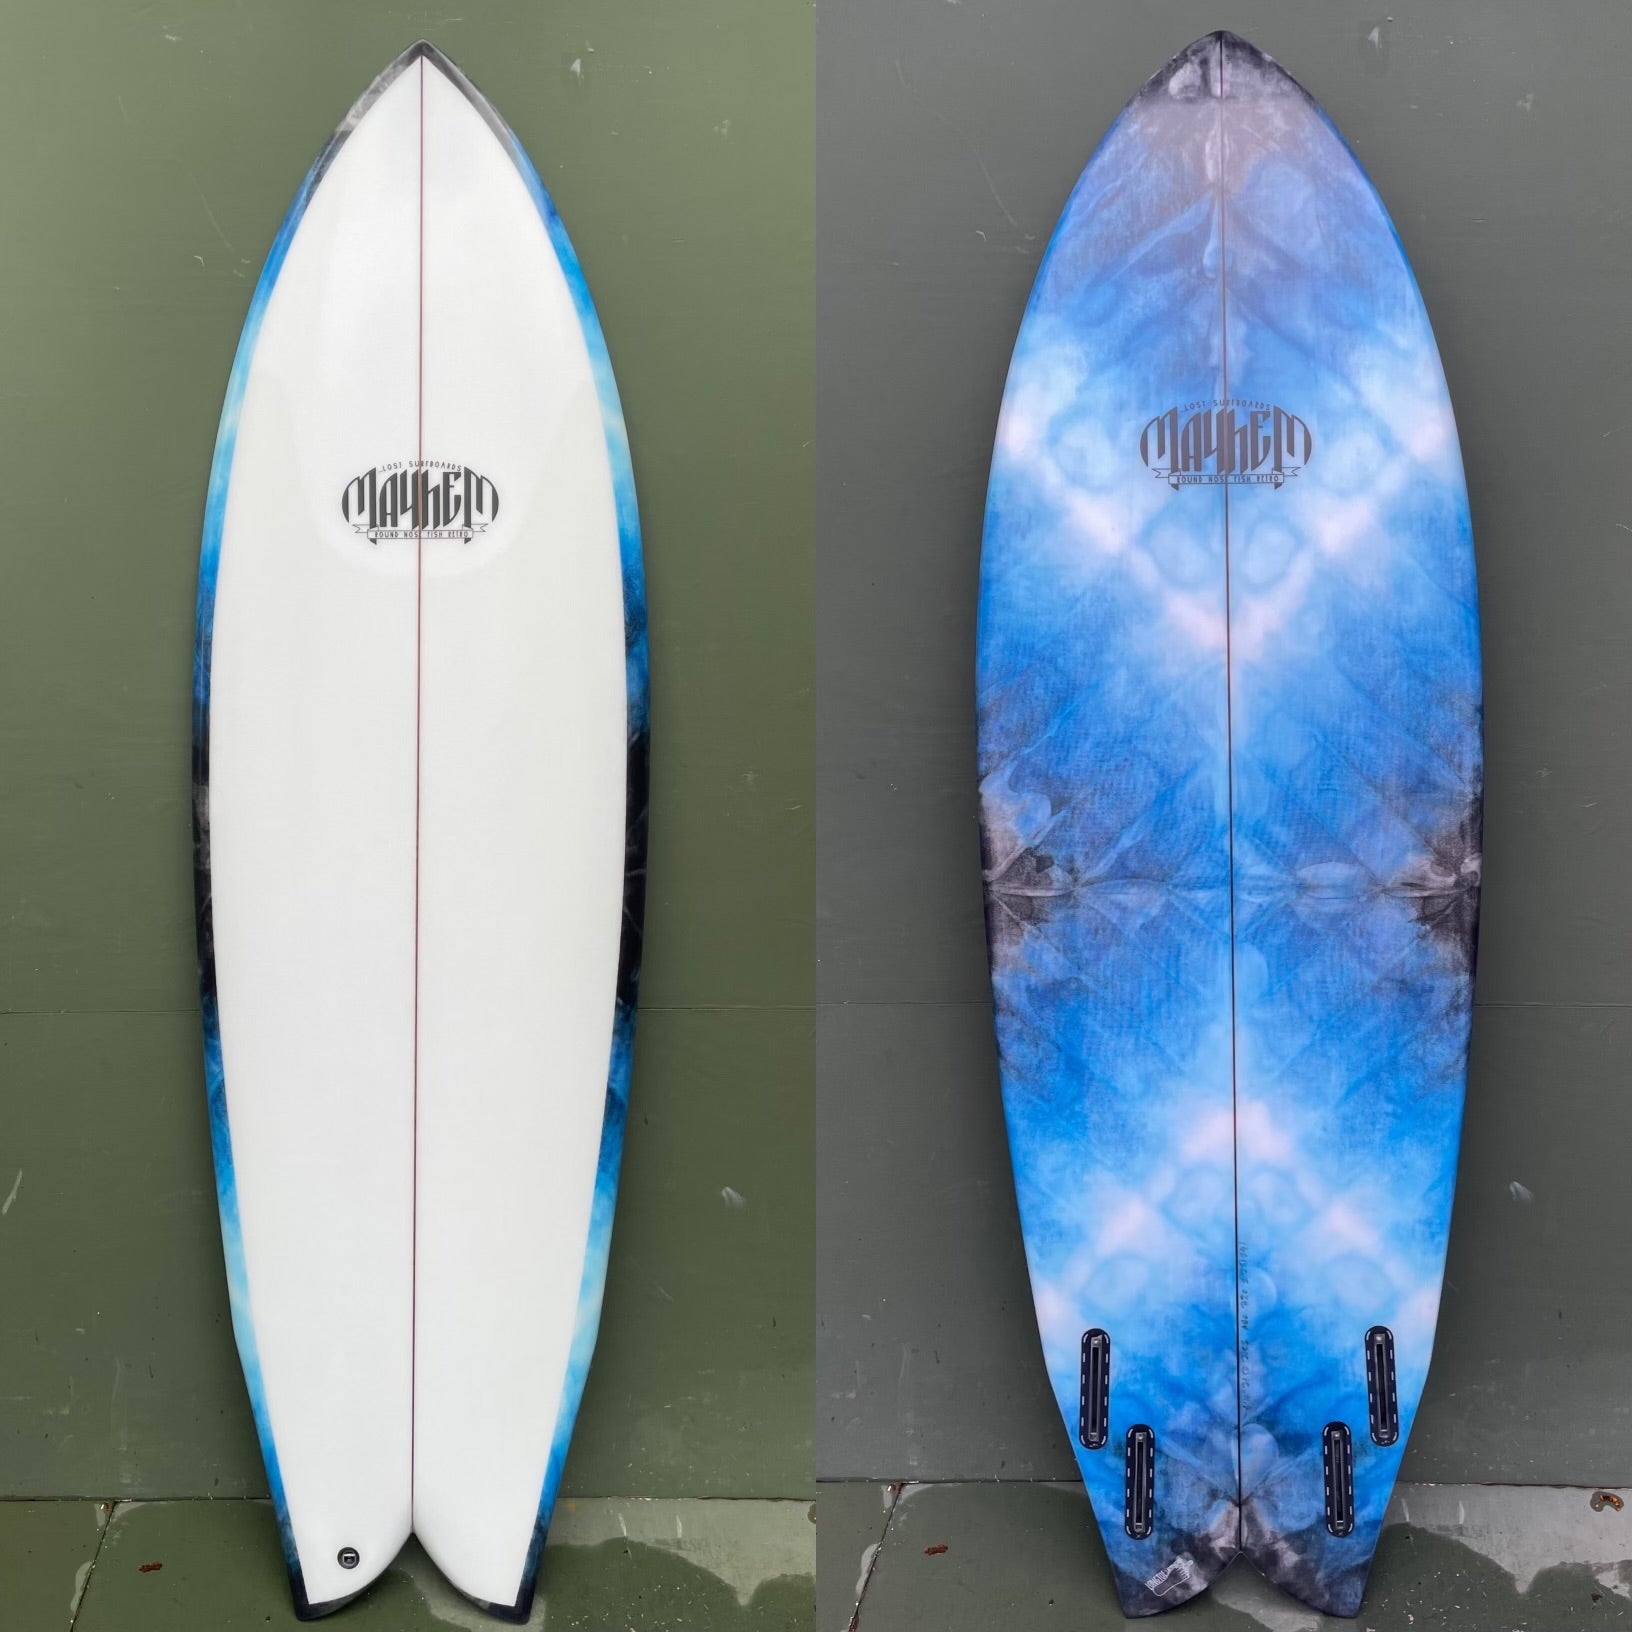 Lost Surfboards - 5'10" Round Nose Fish Retro Revamp Surfboard - Long Toe